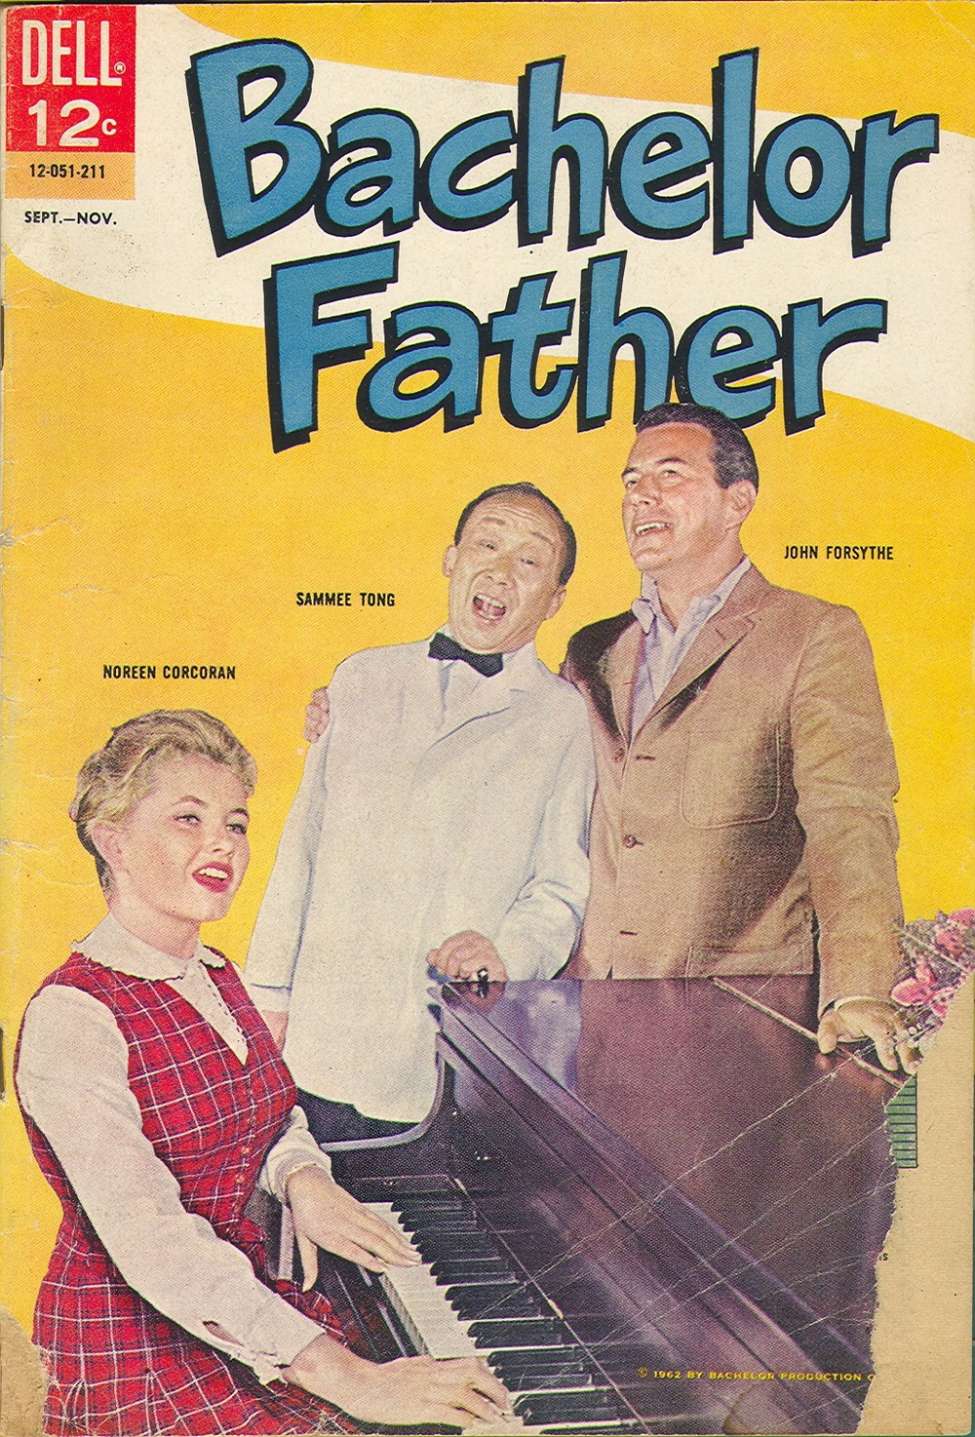 Book Cover For Bachelor Father 2